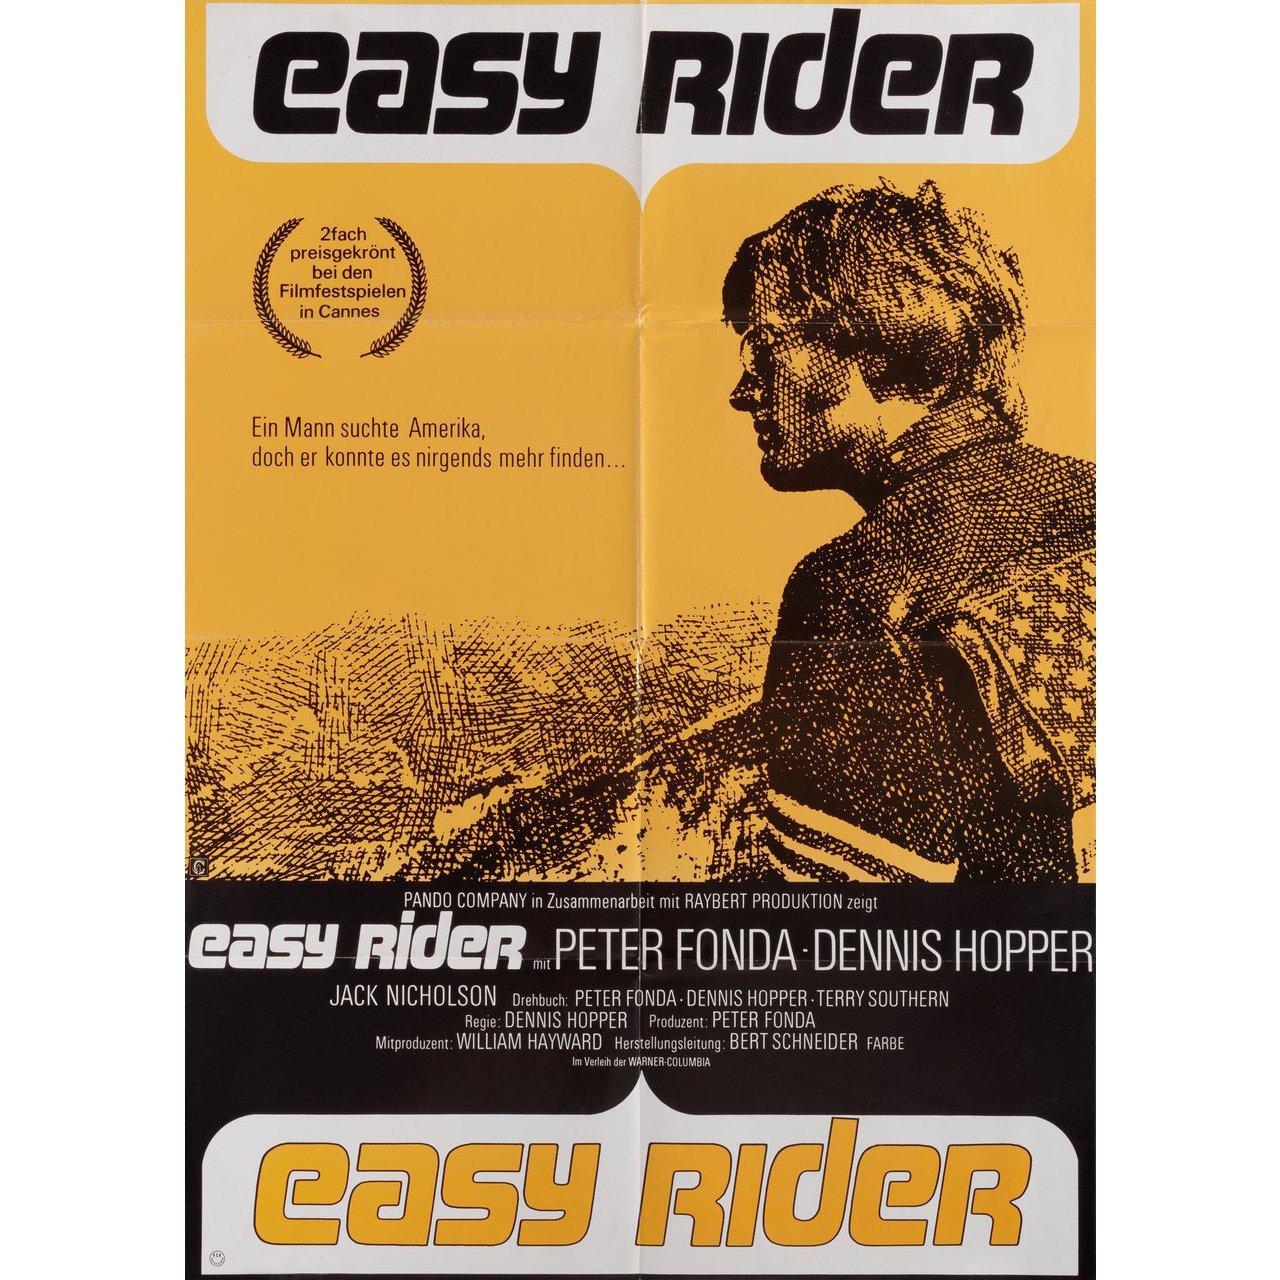 Original 1970s re-release German A1 poster for the film Easy Rider directed by Dennis Hopper with Peter Fonda / Dennis Hopper / Antonio Mendoza / Phil Spector. Fine condition, folded. Many original posters were issued folded or were subsequently